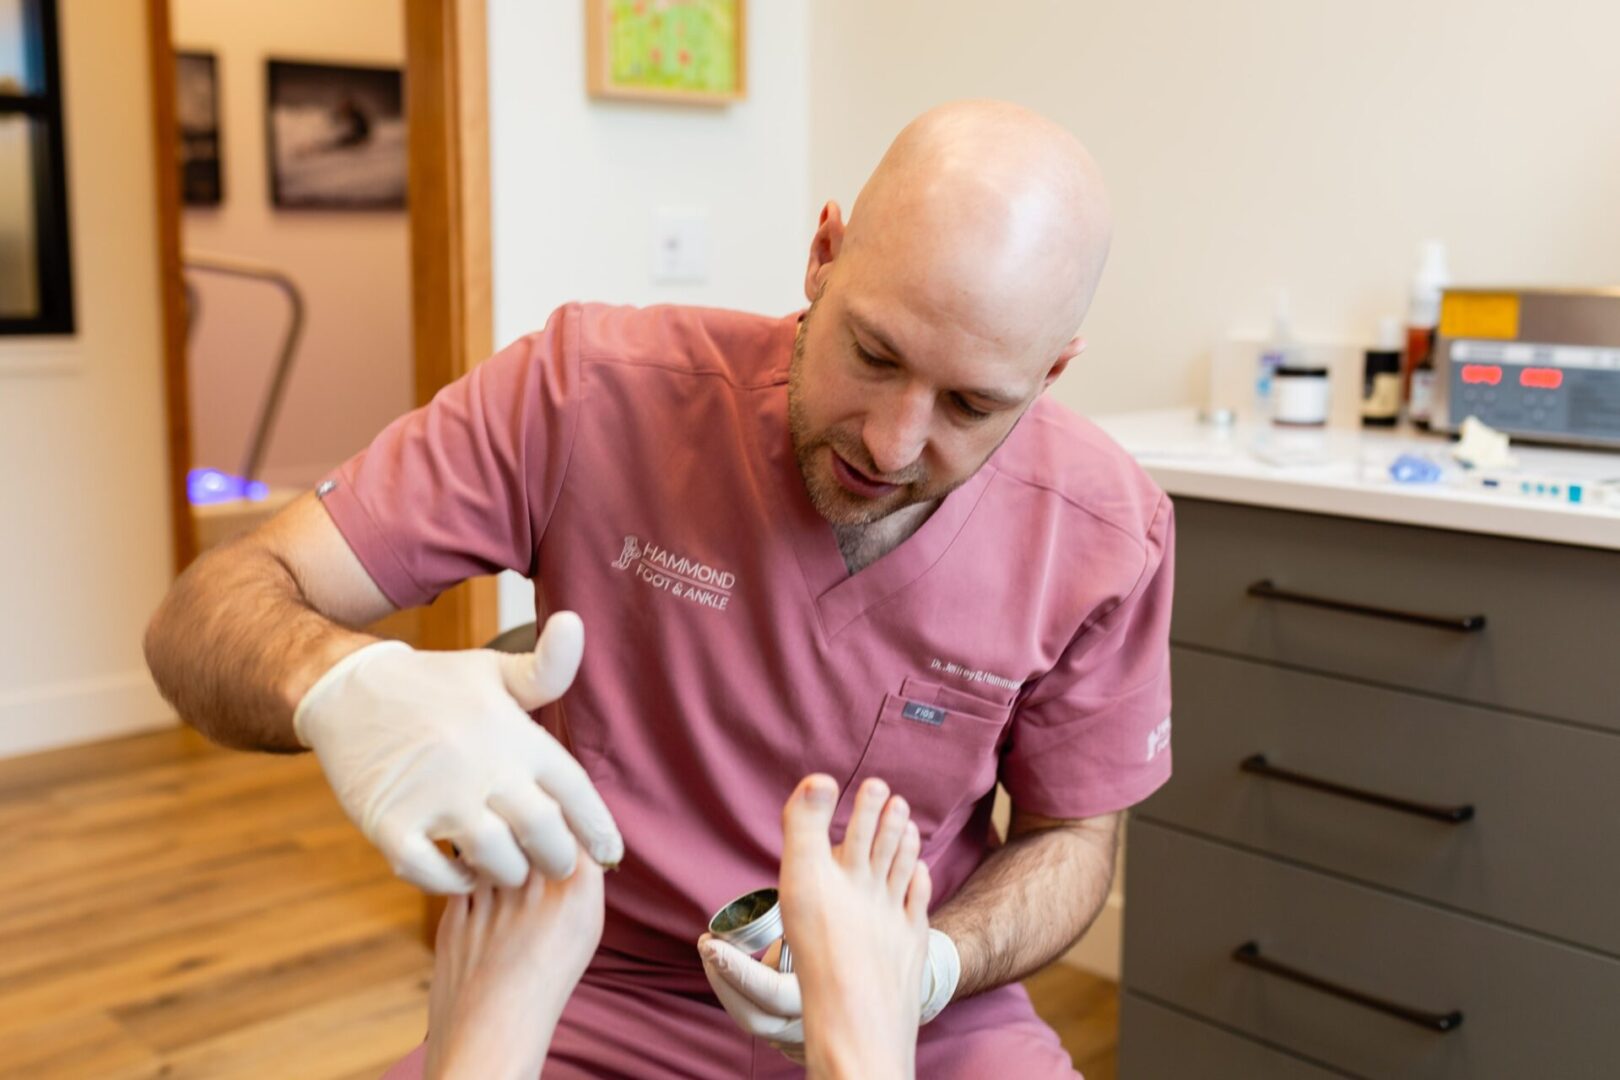 A man in pink shirt getting his foot examined.